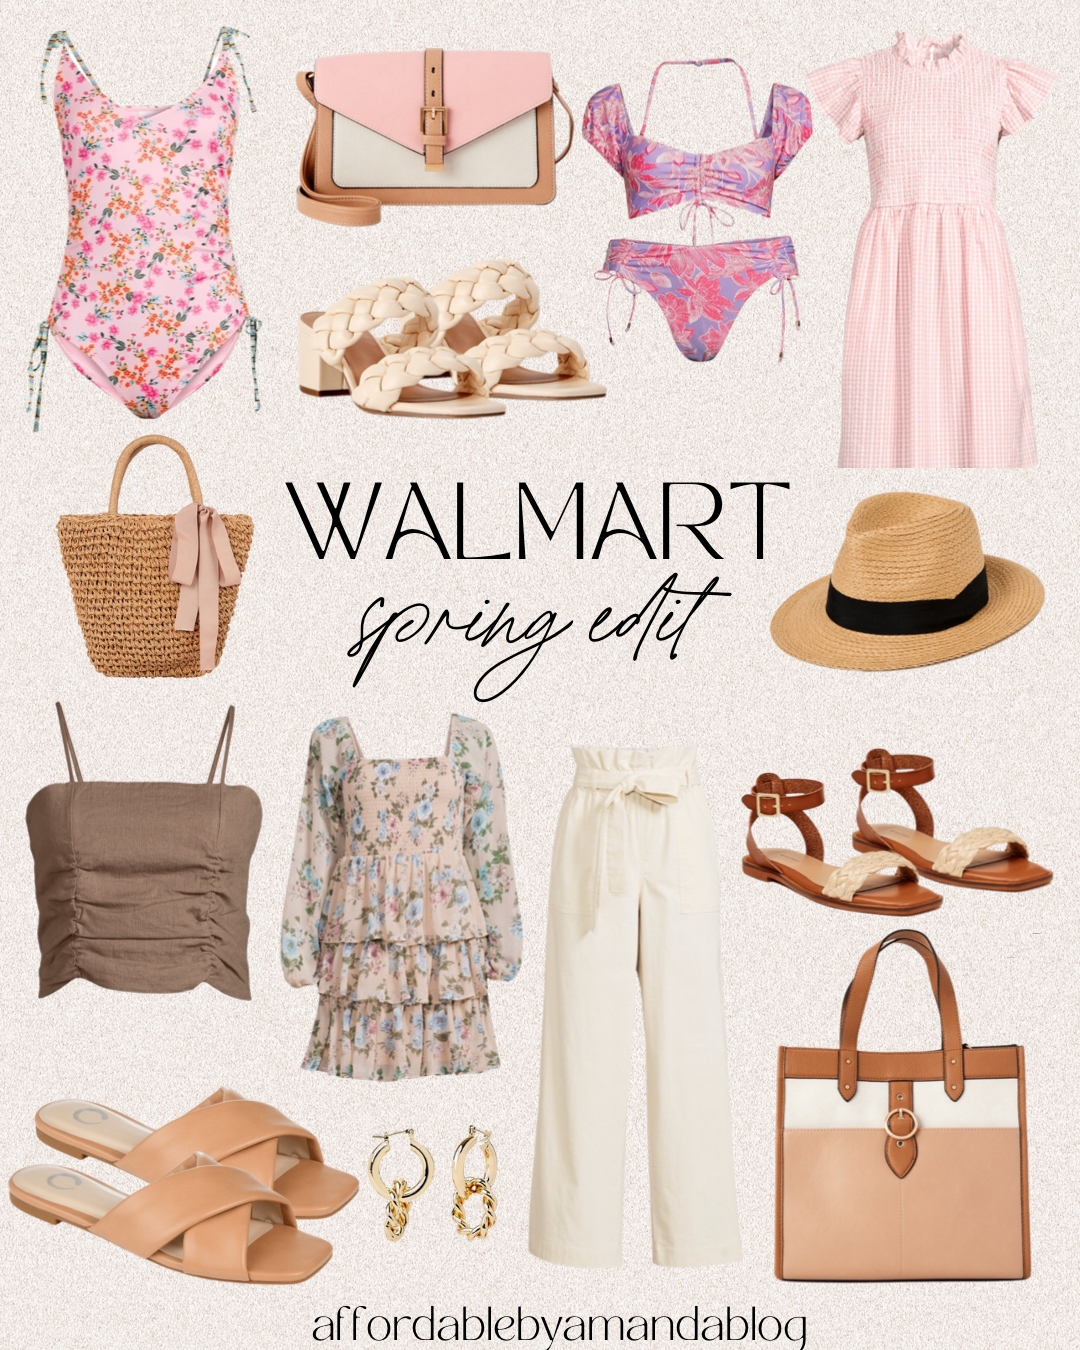 Cute Spring Finds from Walmart - Spring 2022 Walmart Dresses, Shoes, Bags, Swimwear - Affordable by Amanda